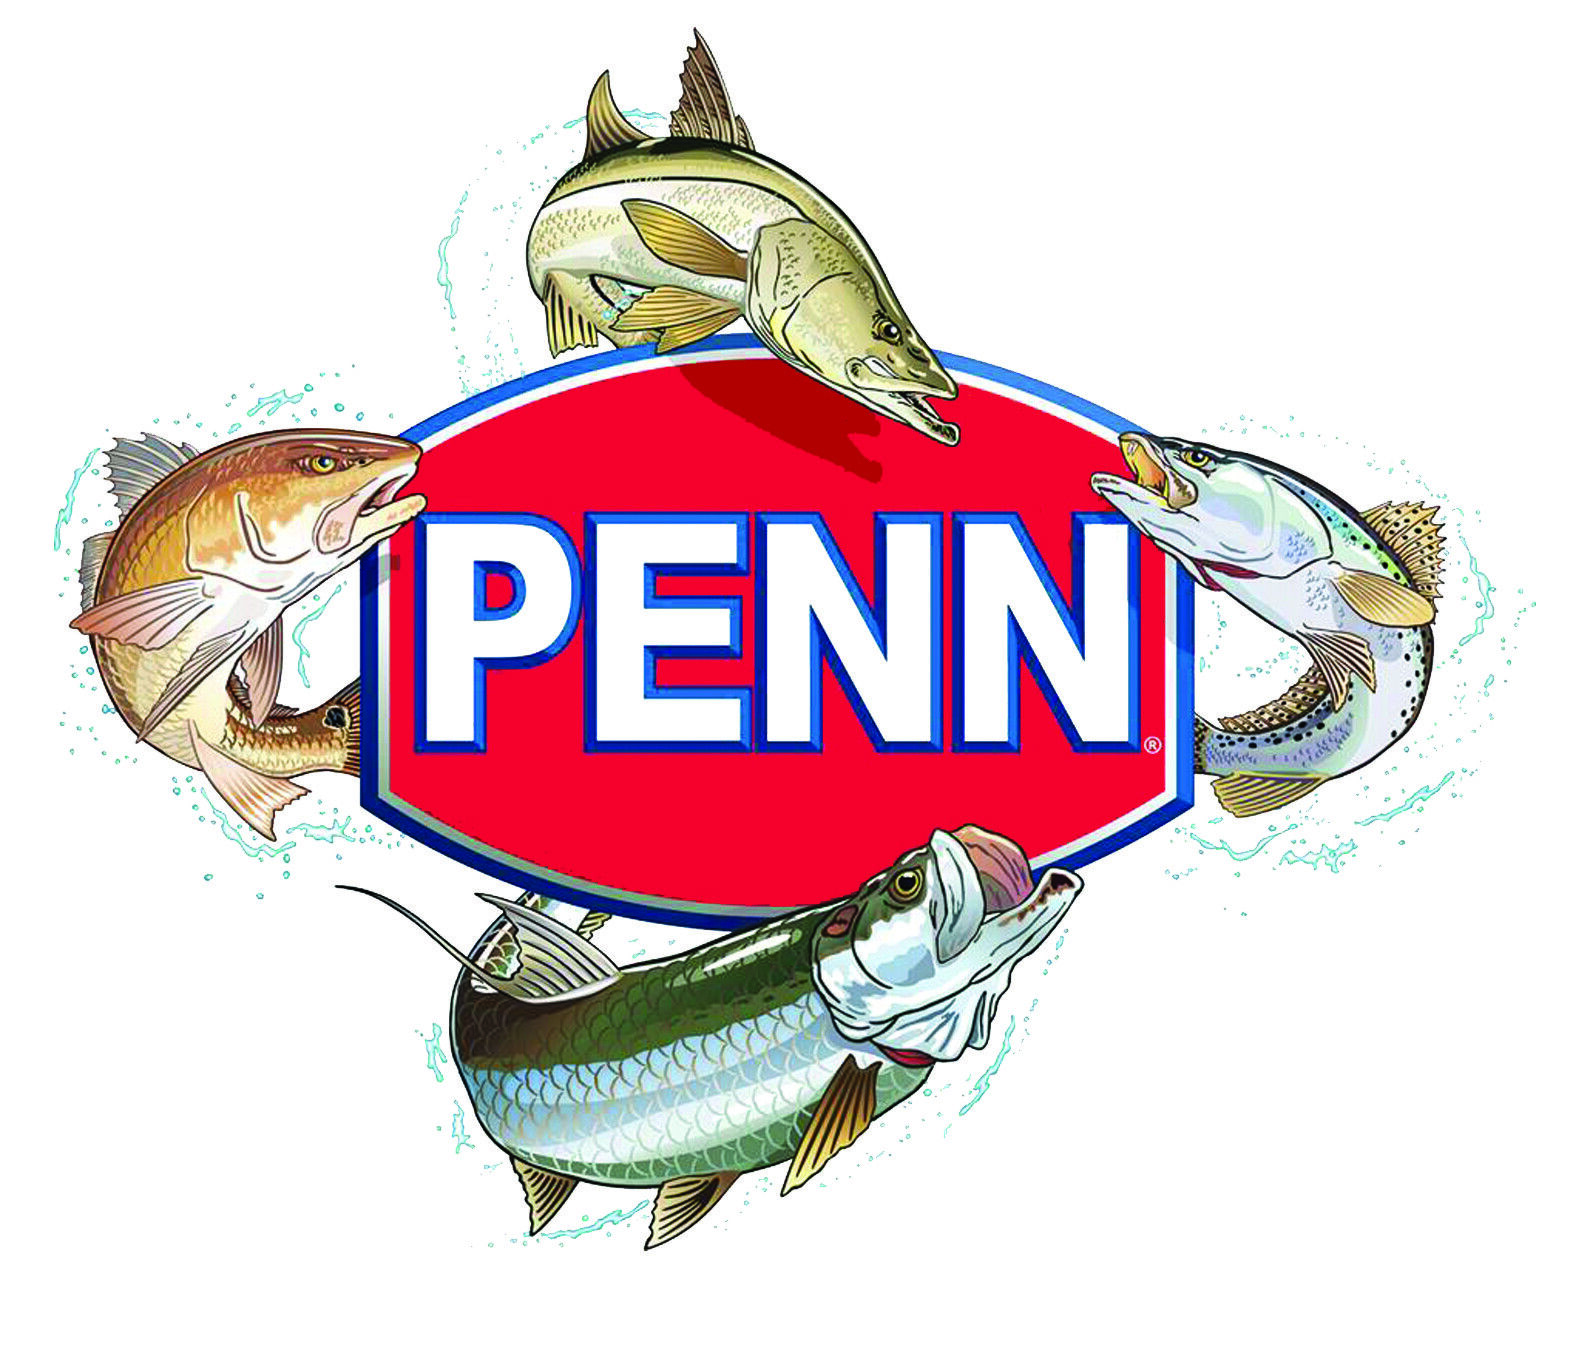 PENN FISHING STICKER LAKE MIX TROUT DECAL LABEL DECAL LURE REEL TACKLE BOX USA